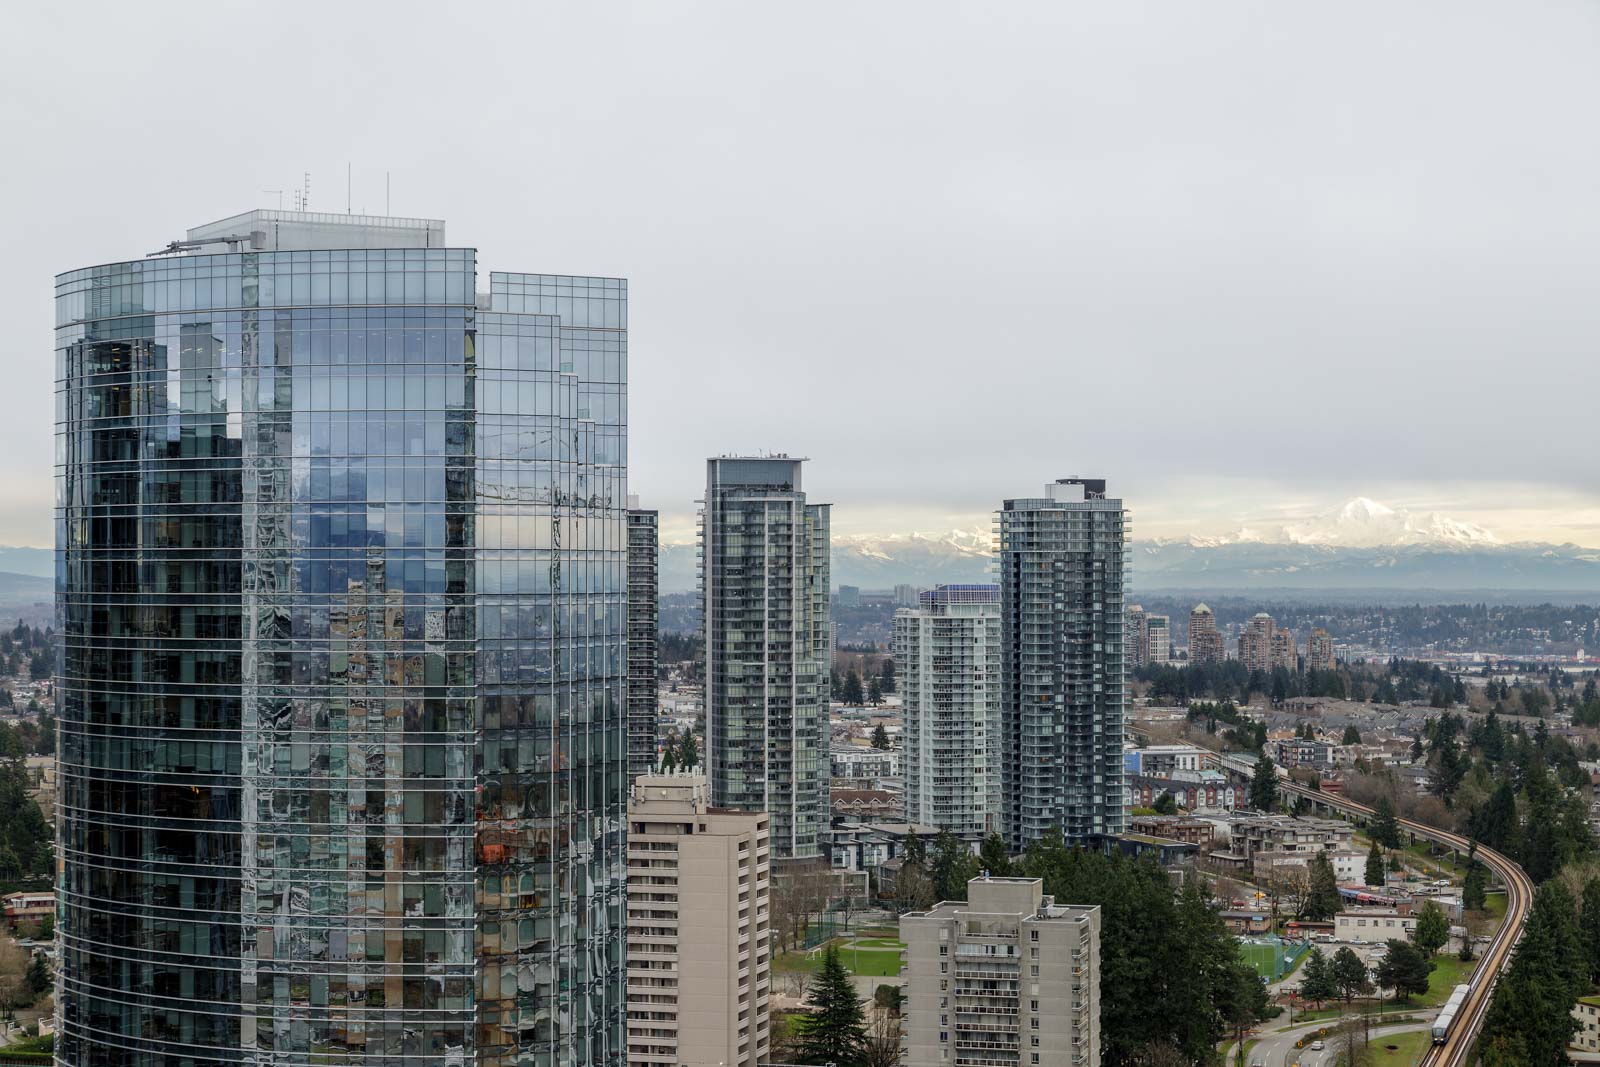 View from Sun Tower 1 building in Burnaby’s Metrotown